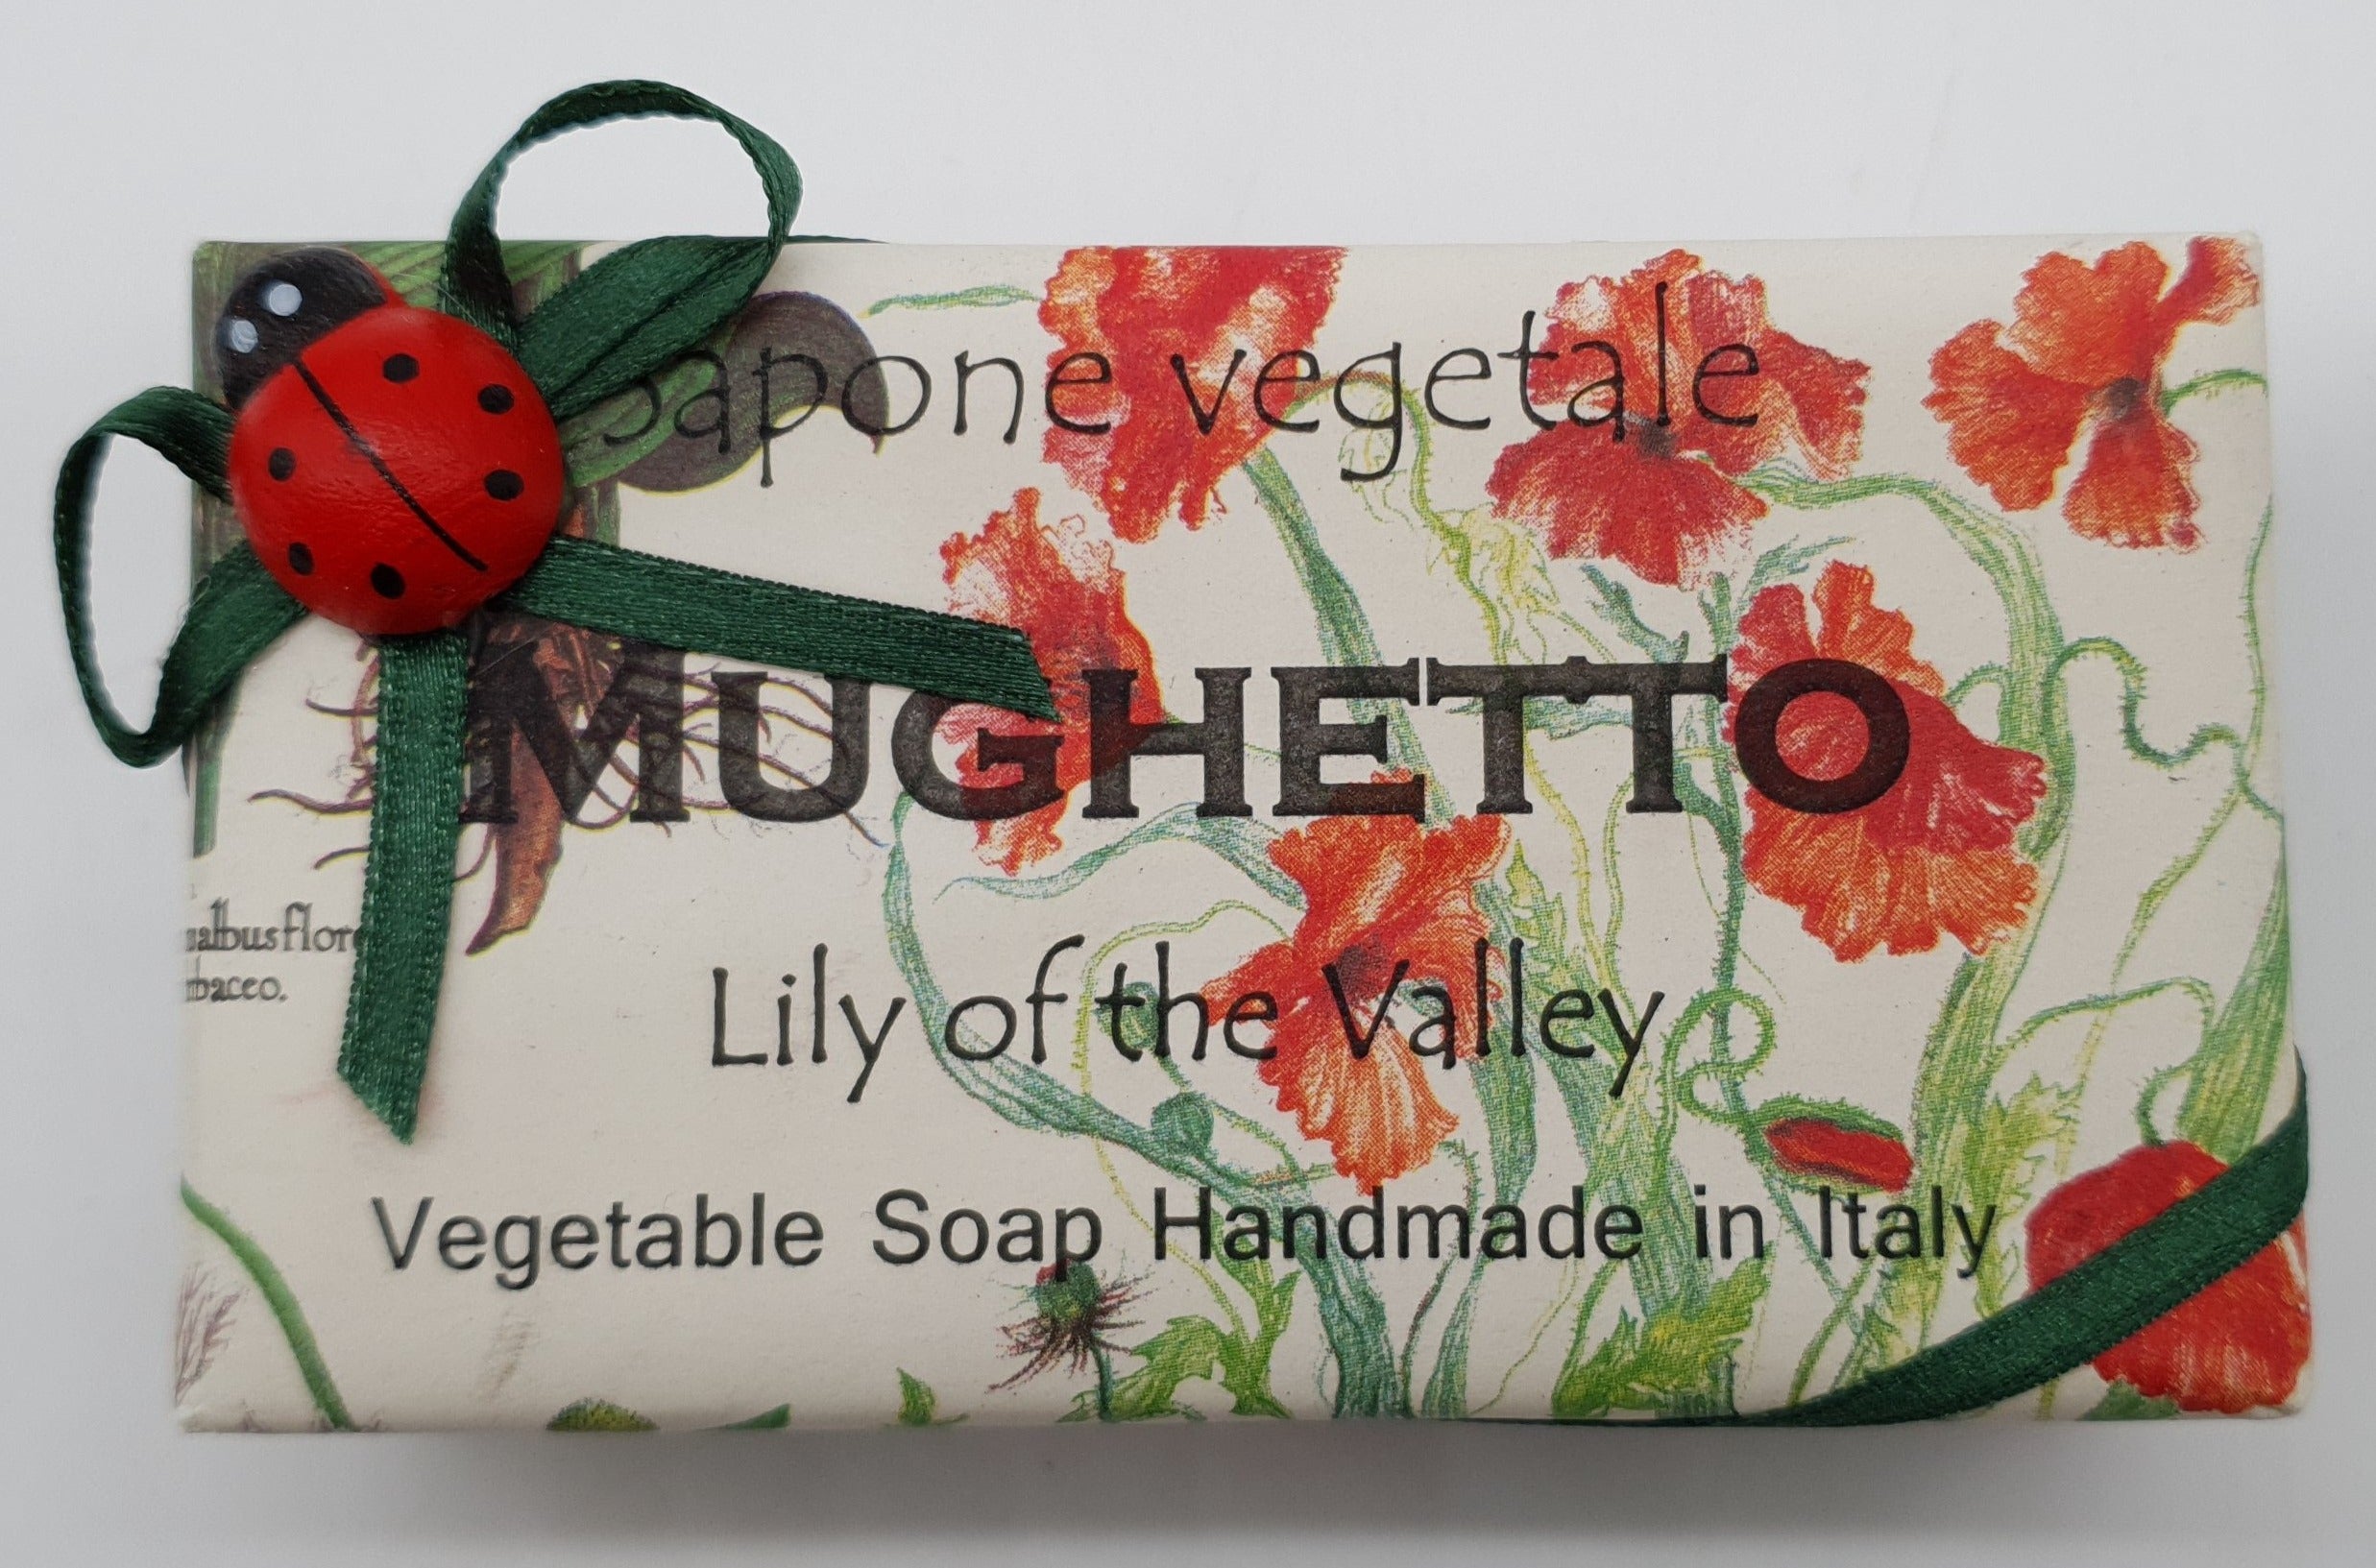 Lily of the Valley Vegetable Soap